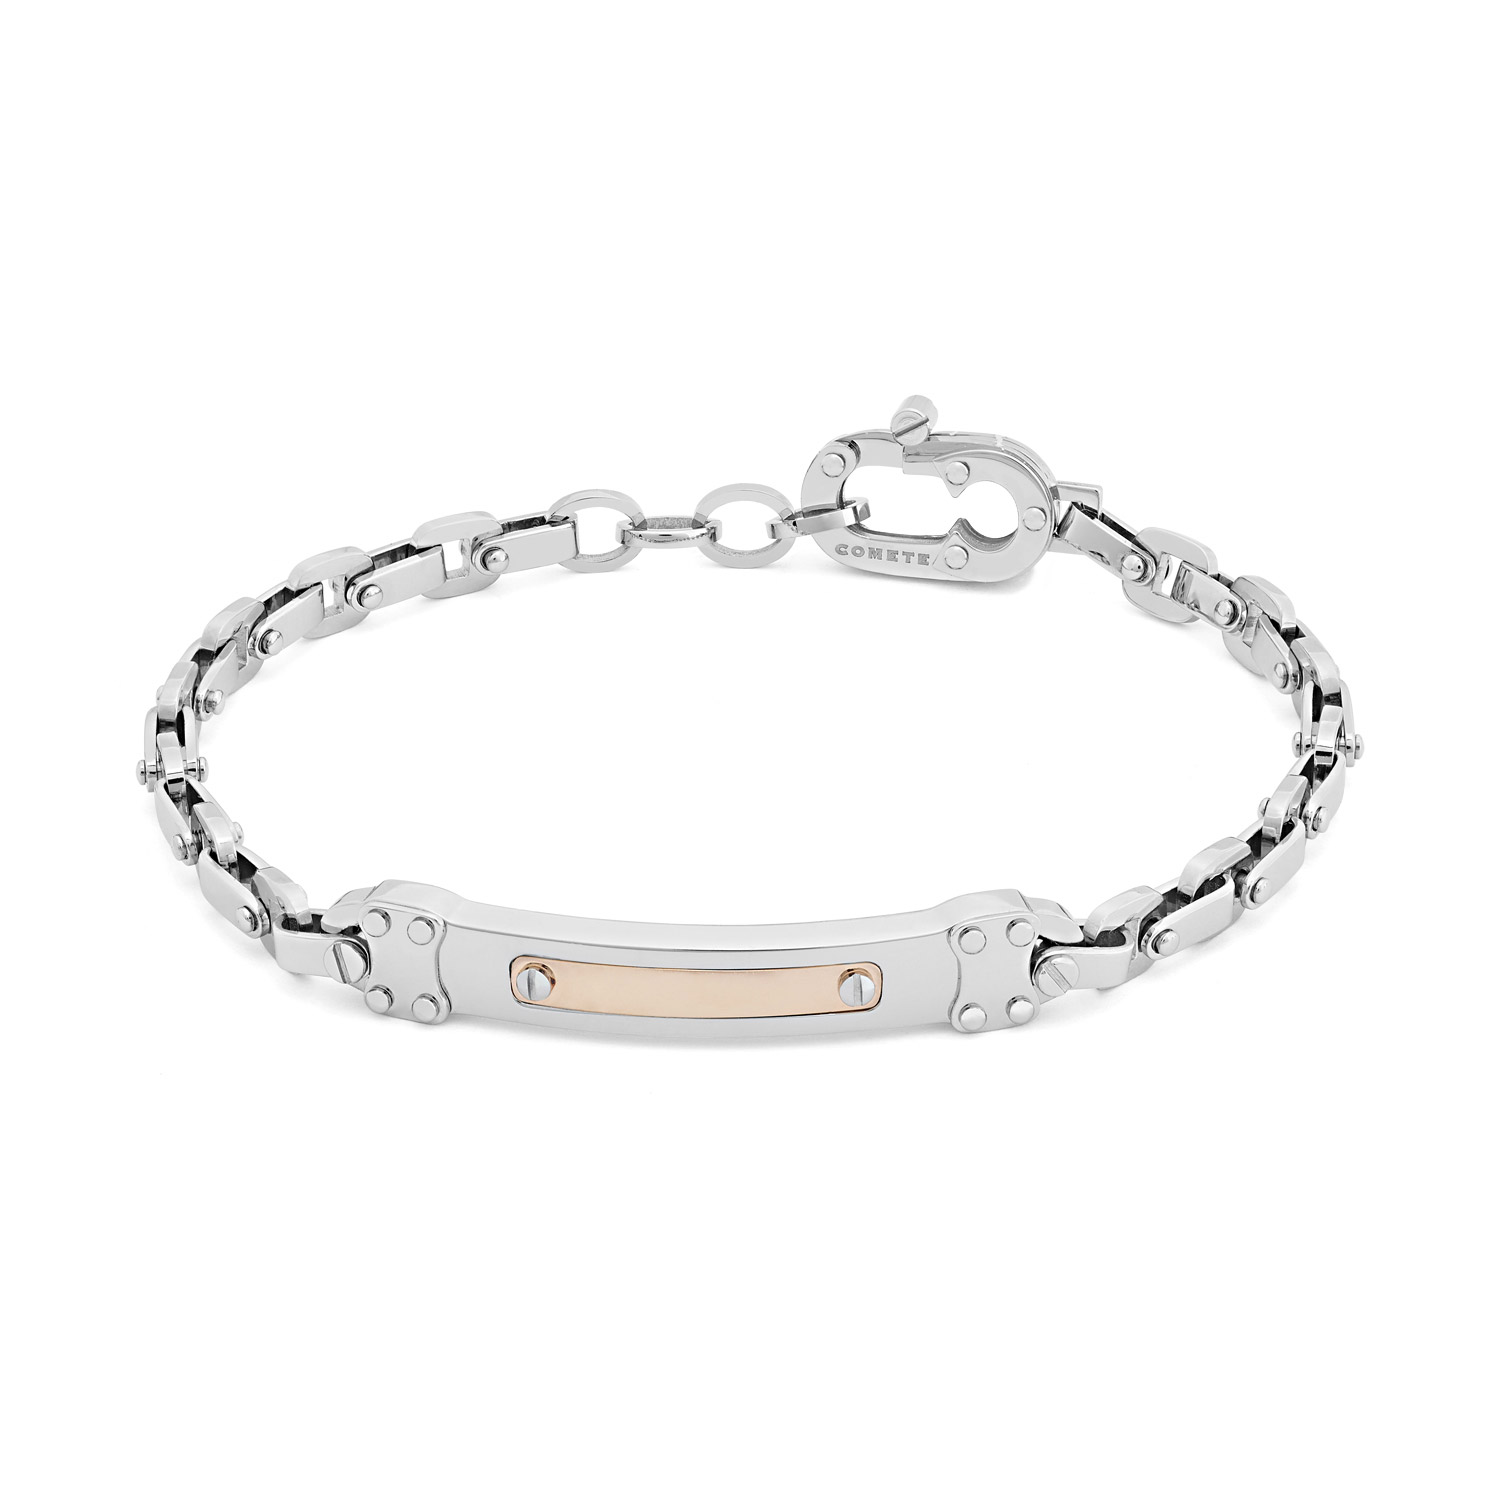 Comete Jewelry Men's Silver and Rose Gold Chain Bracelet